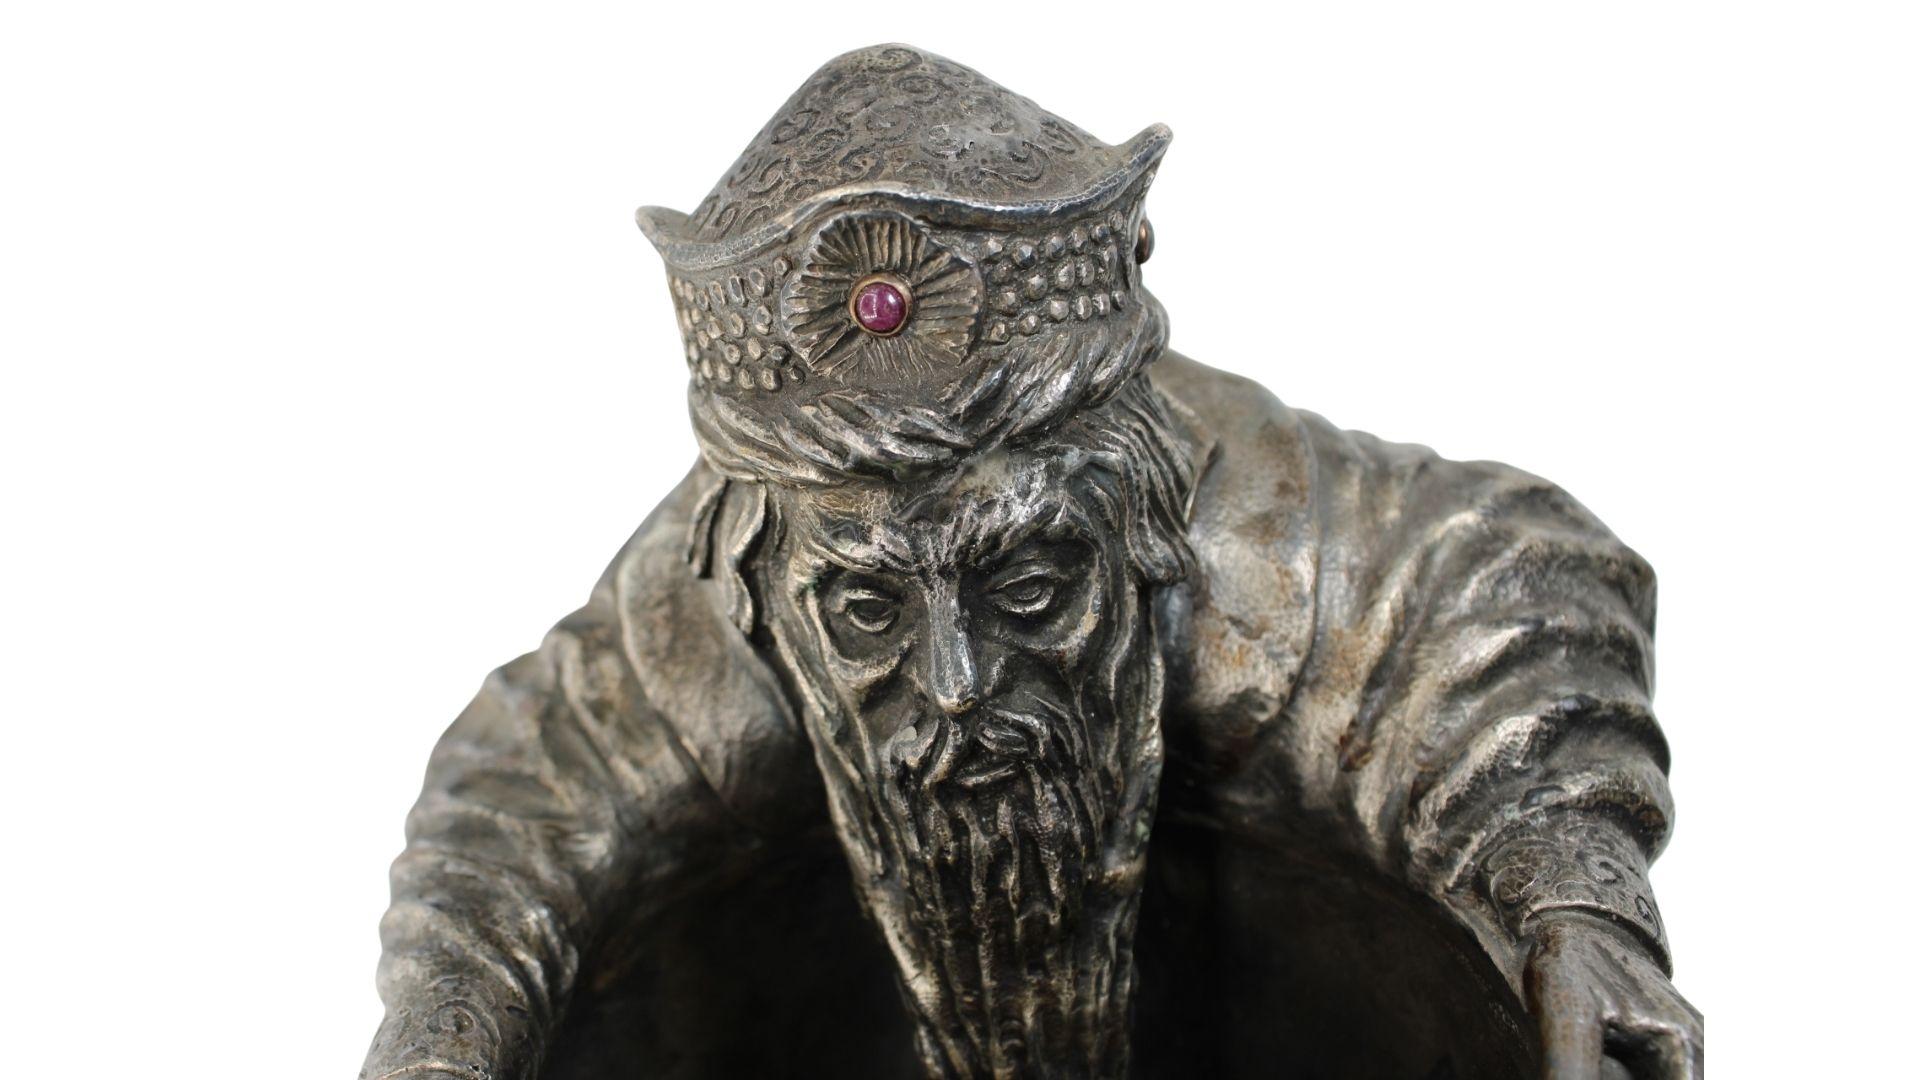 This stunning piece created by Pavel Ovchinnikov shows his amazing work in silver engraving.
This piece represents an old monk sitting while his beard falls into a cauldron.
On the monk's head is a hat with different shapes,  in the center of it